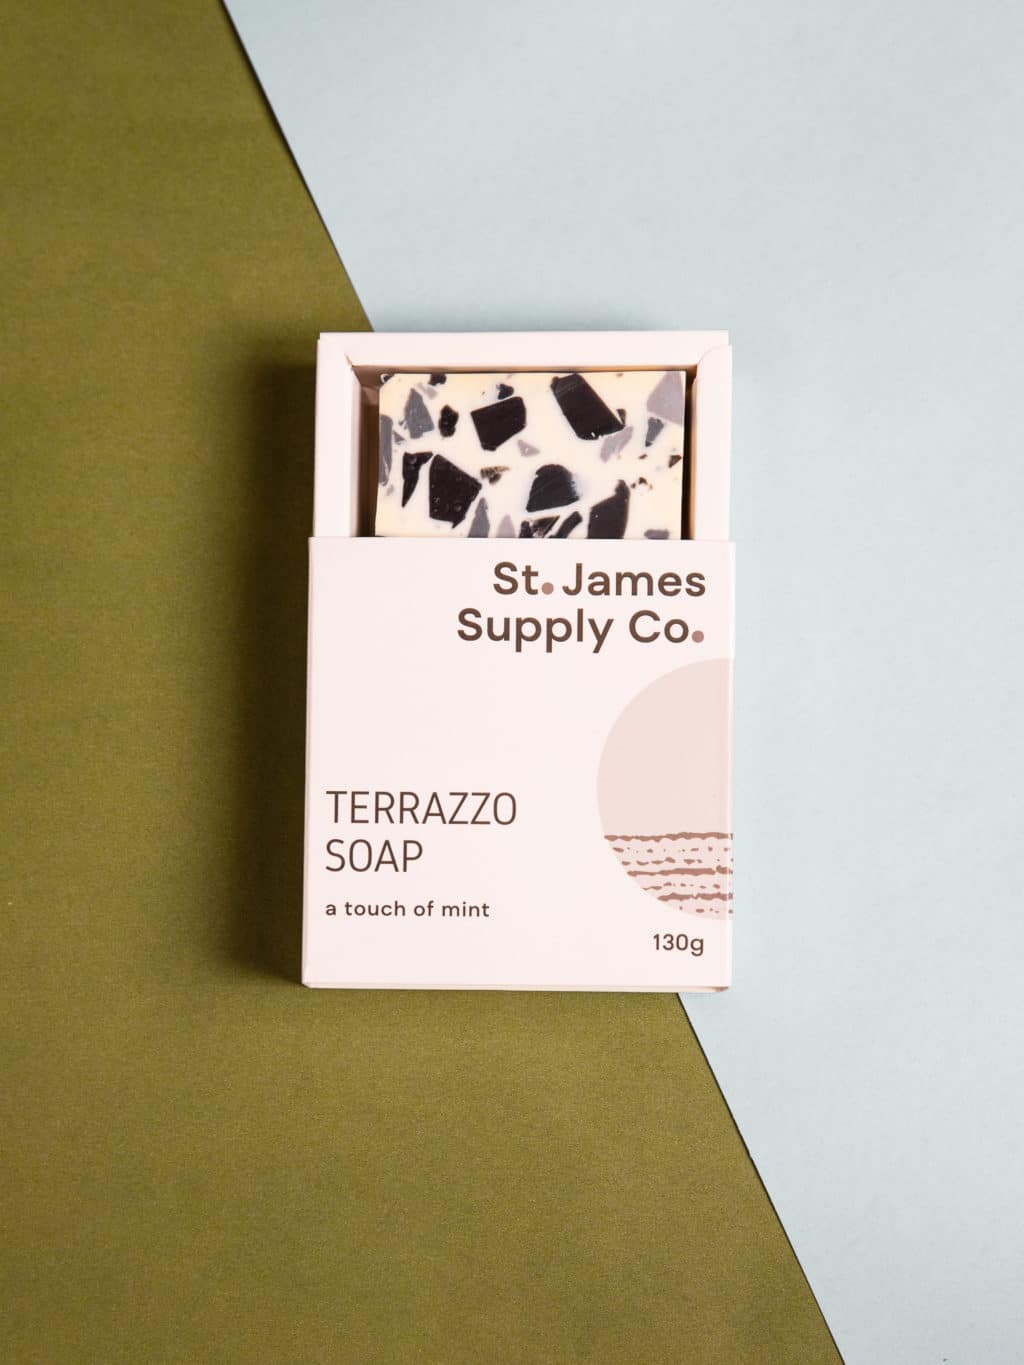 Terrazzo soap. A beautiful gift at our boutique, Wagga Wagga florist shop.